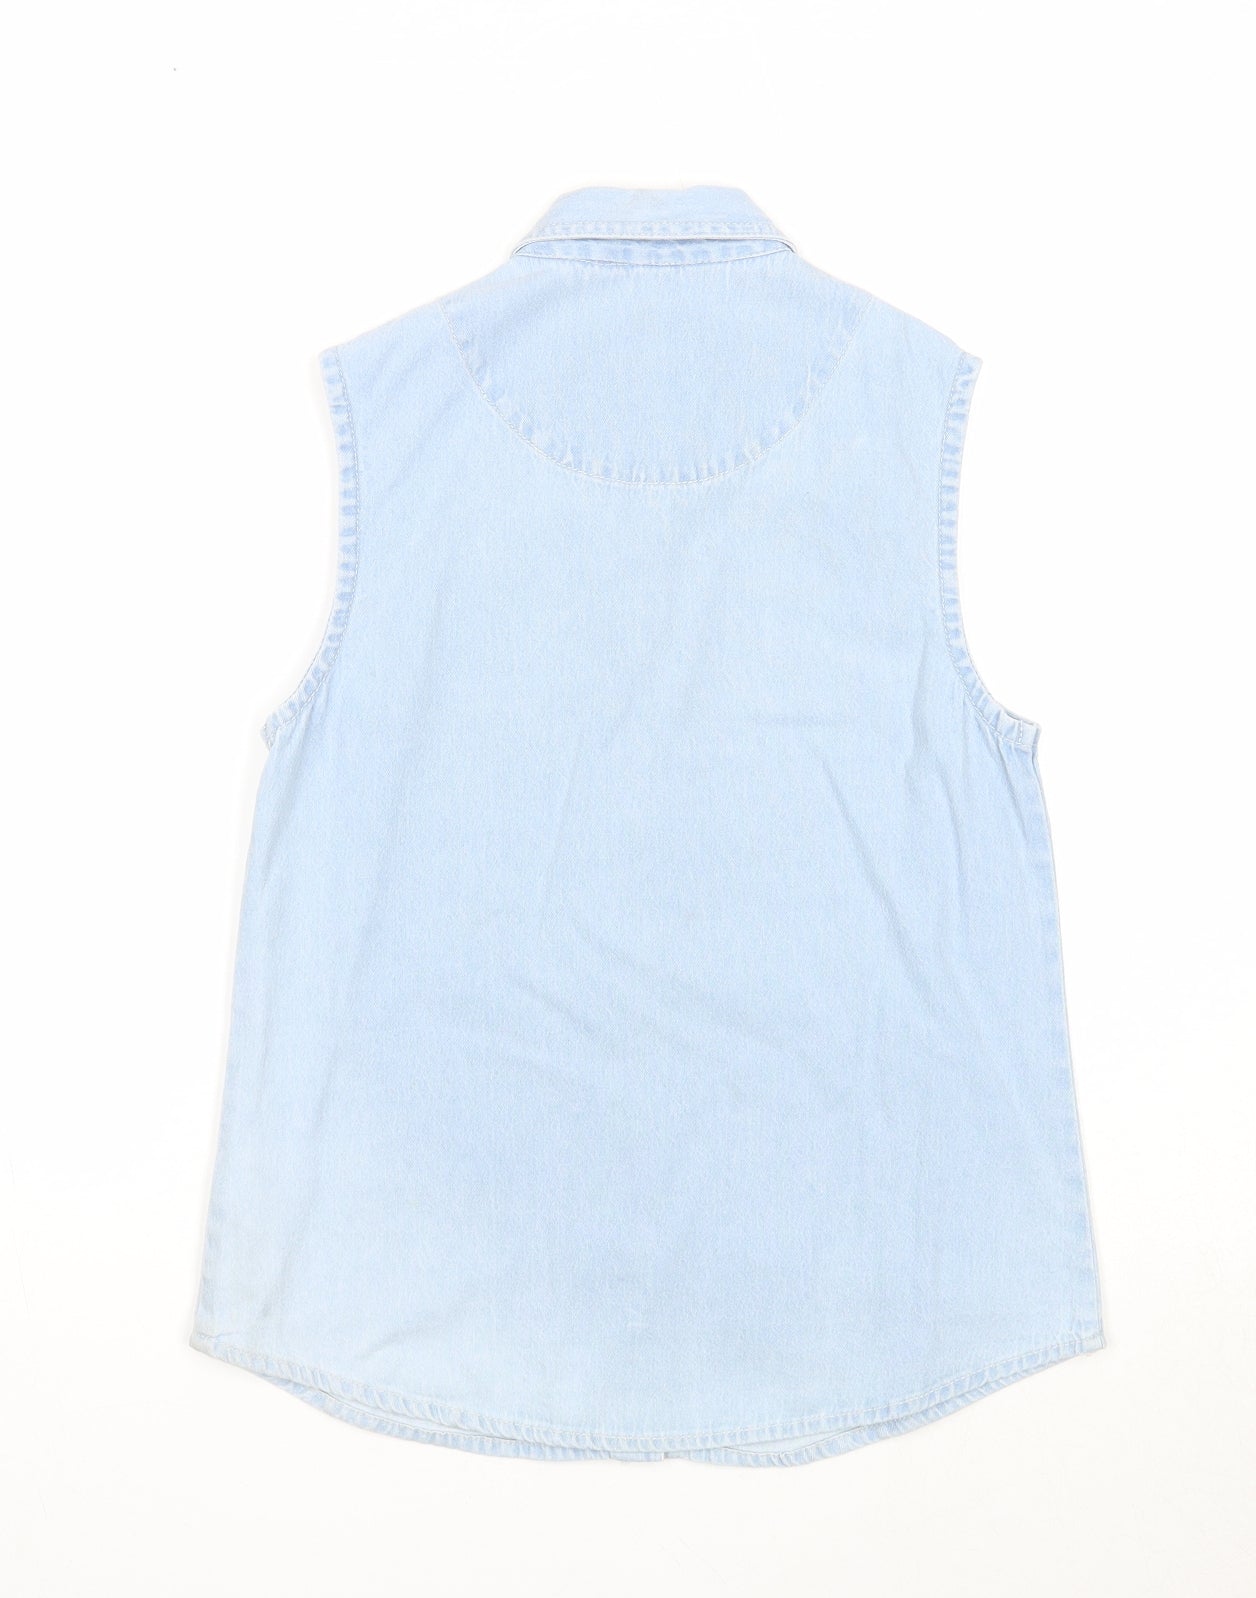 Sophie Girls Blue Cotton Basic Button-Up Size 12-13 Years Collared Snap